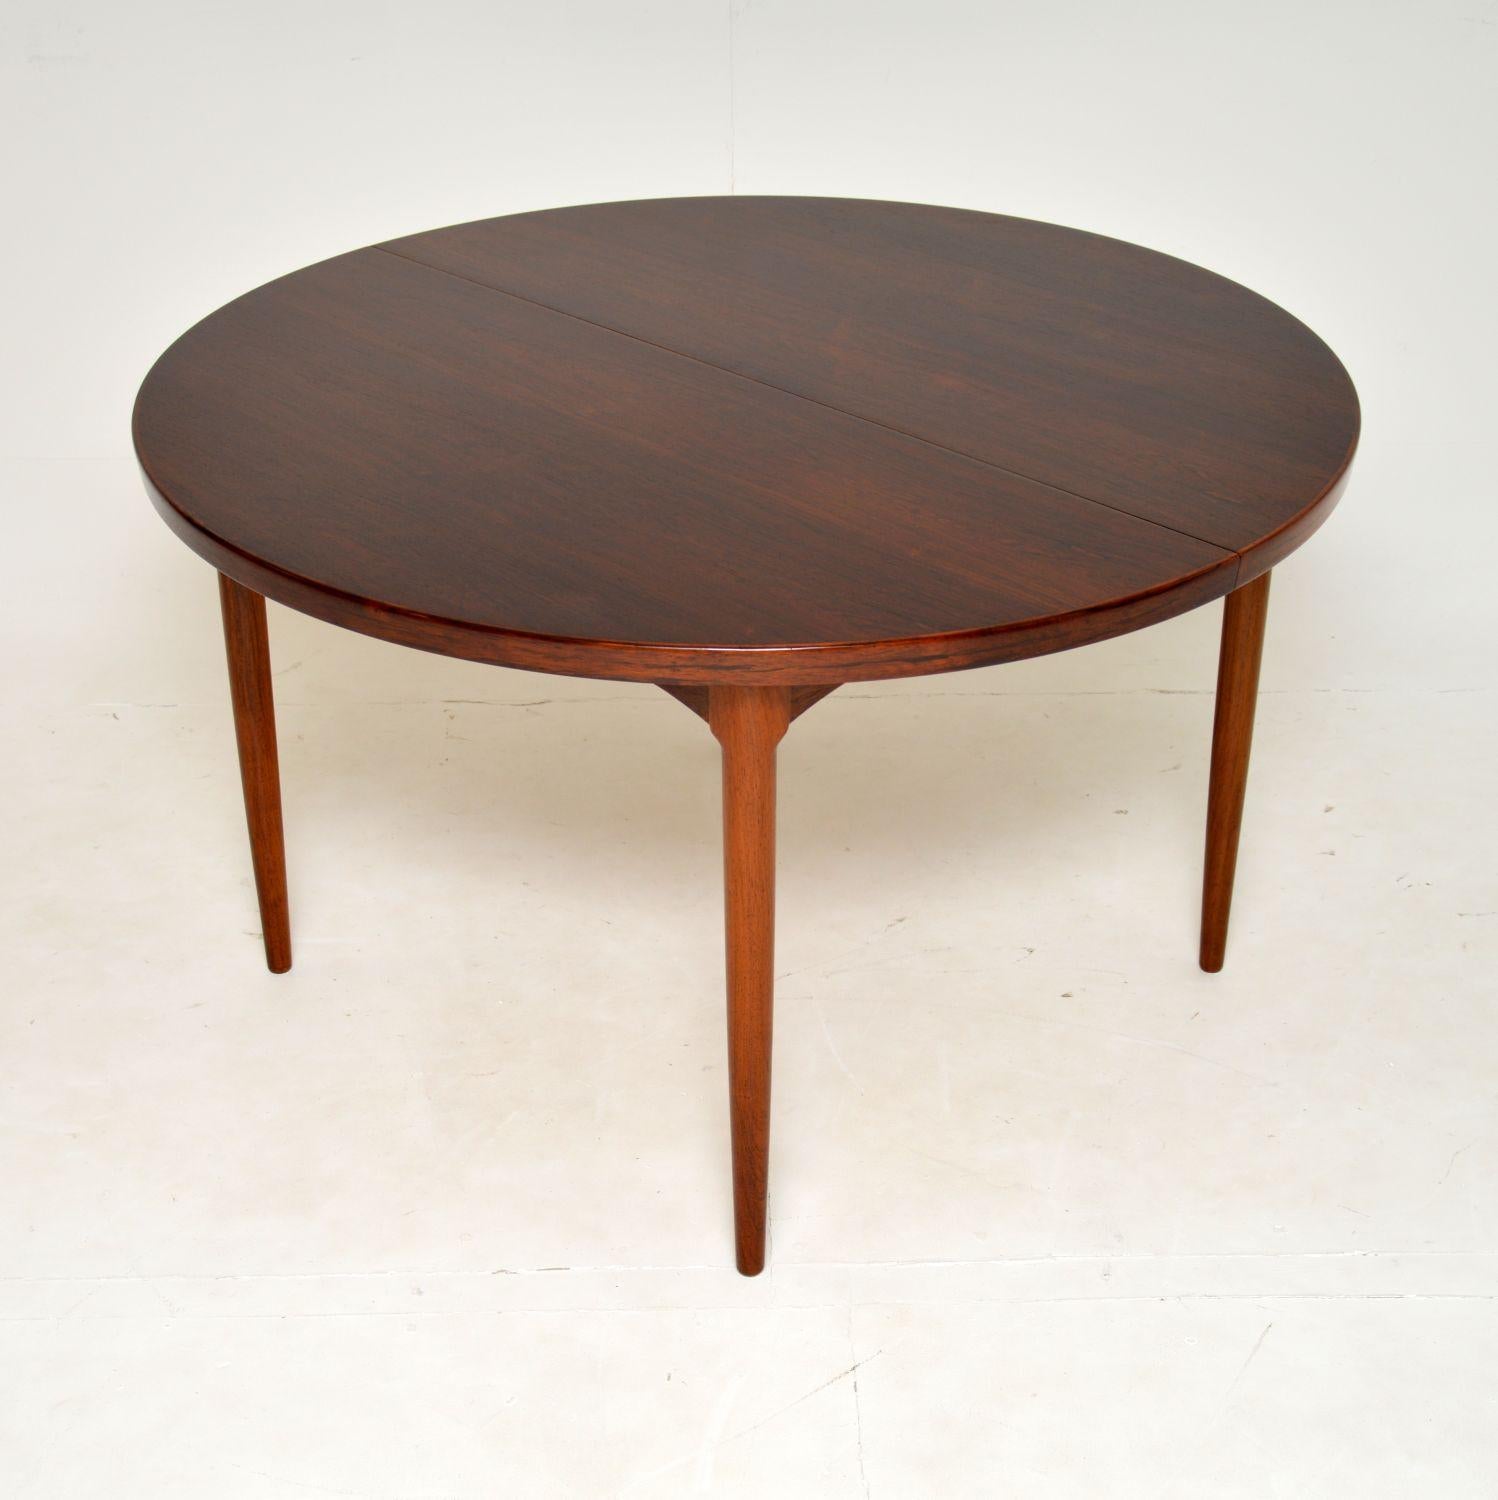 A stunning vintage Danish dining table of the highest quality. This dates from the 1960’s.

It is a very rare model, we are currently unable to pin down the designer as we can’t find another like it anywhere.

It is extremely well made, with a nice